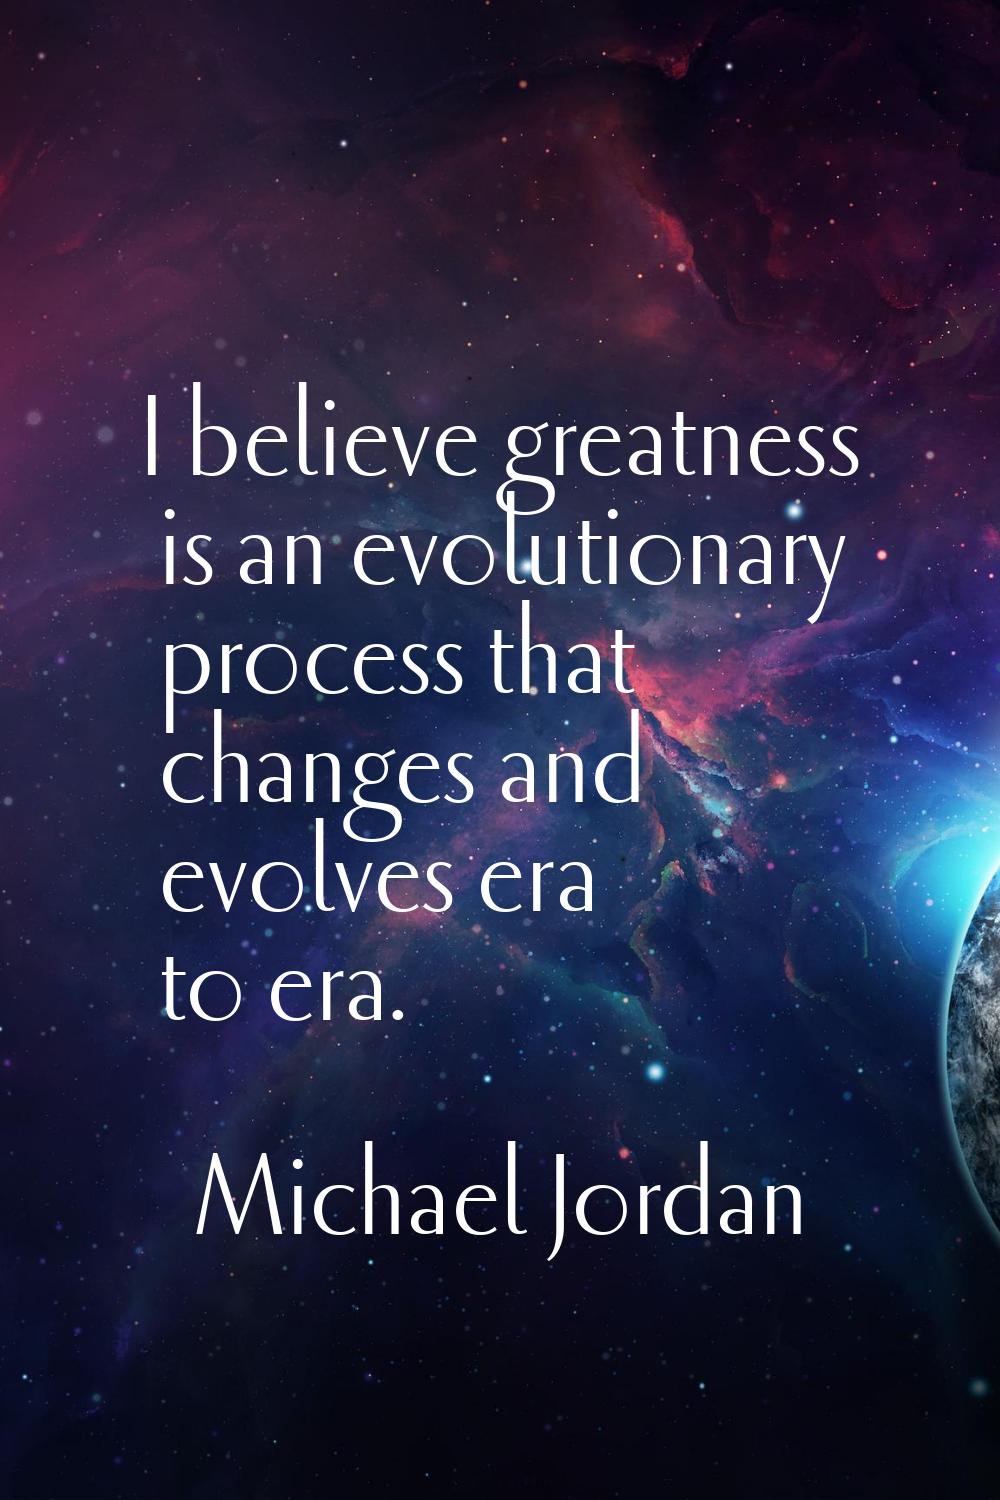 I believe greatness is an evolutionary process that changes and evolves era to era.